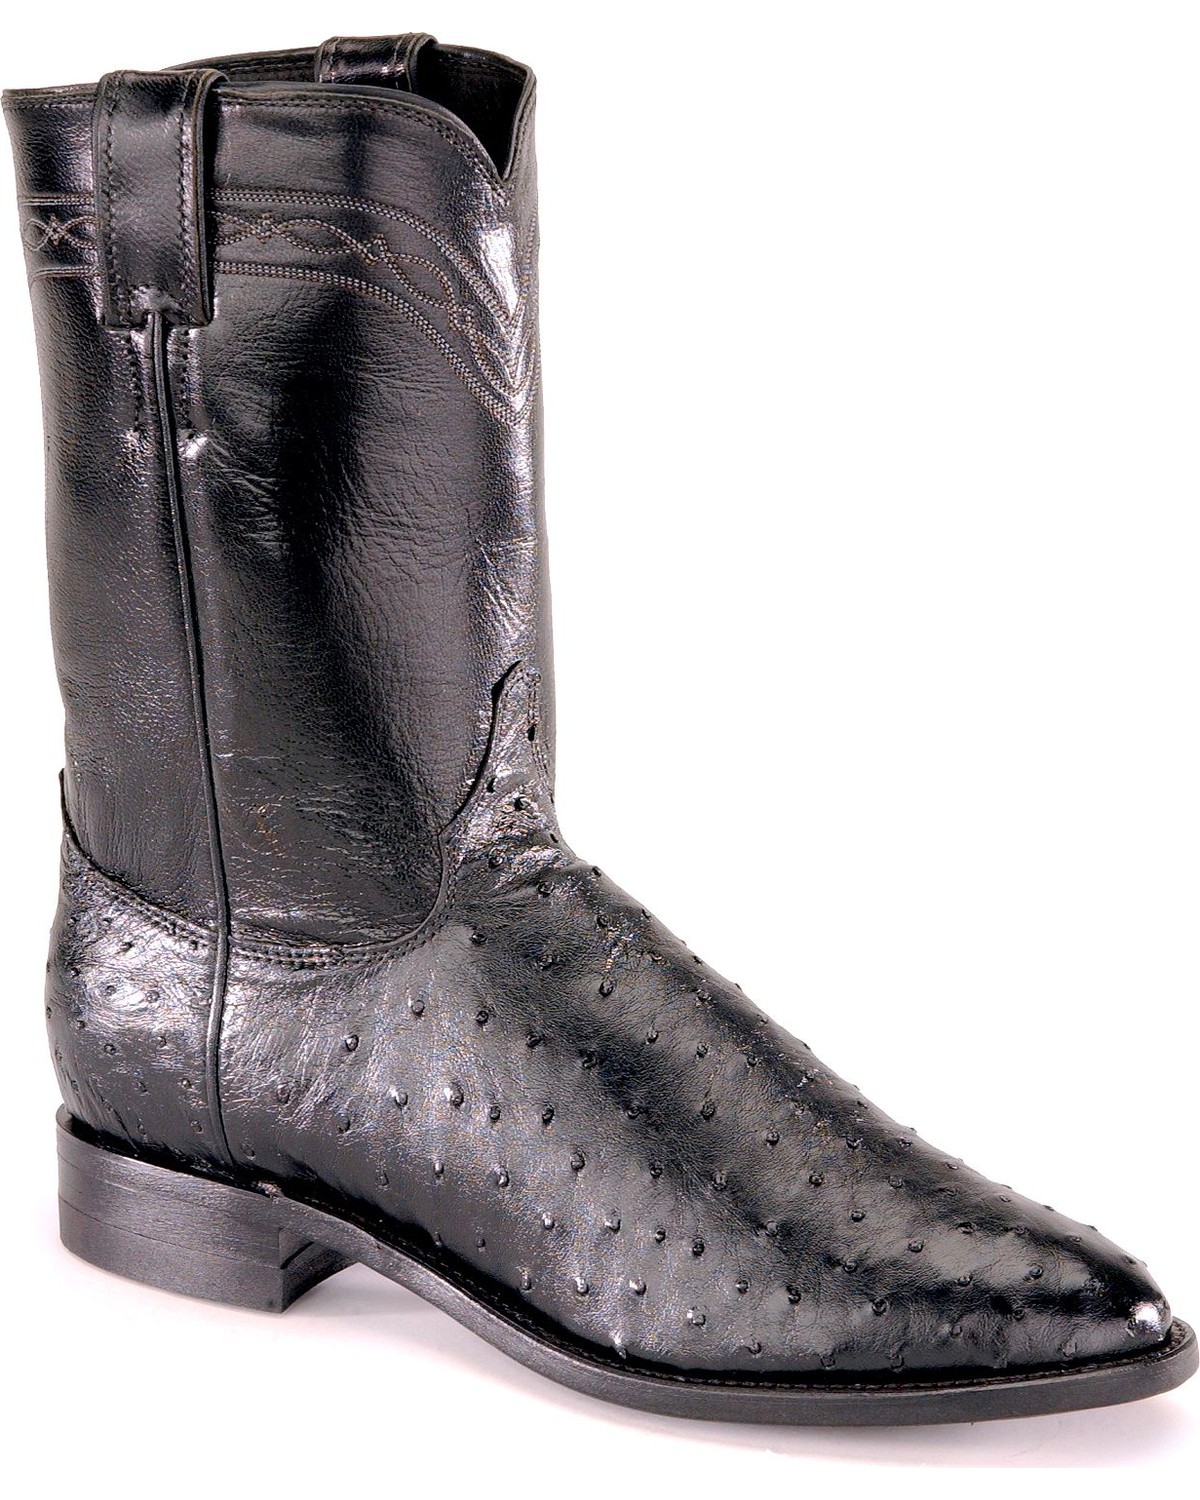 Full Quill Ostrich Exotic Boots | Boot Barn